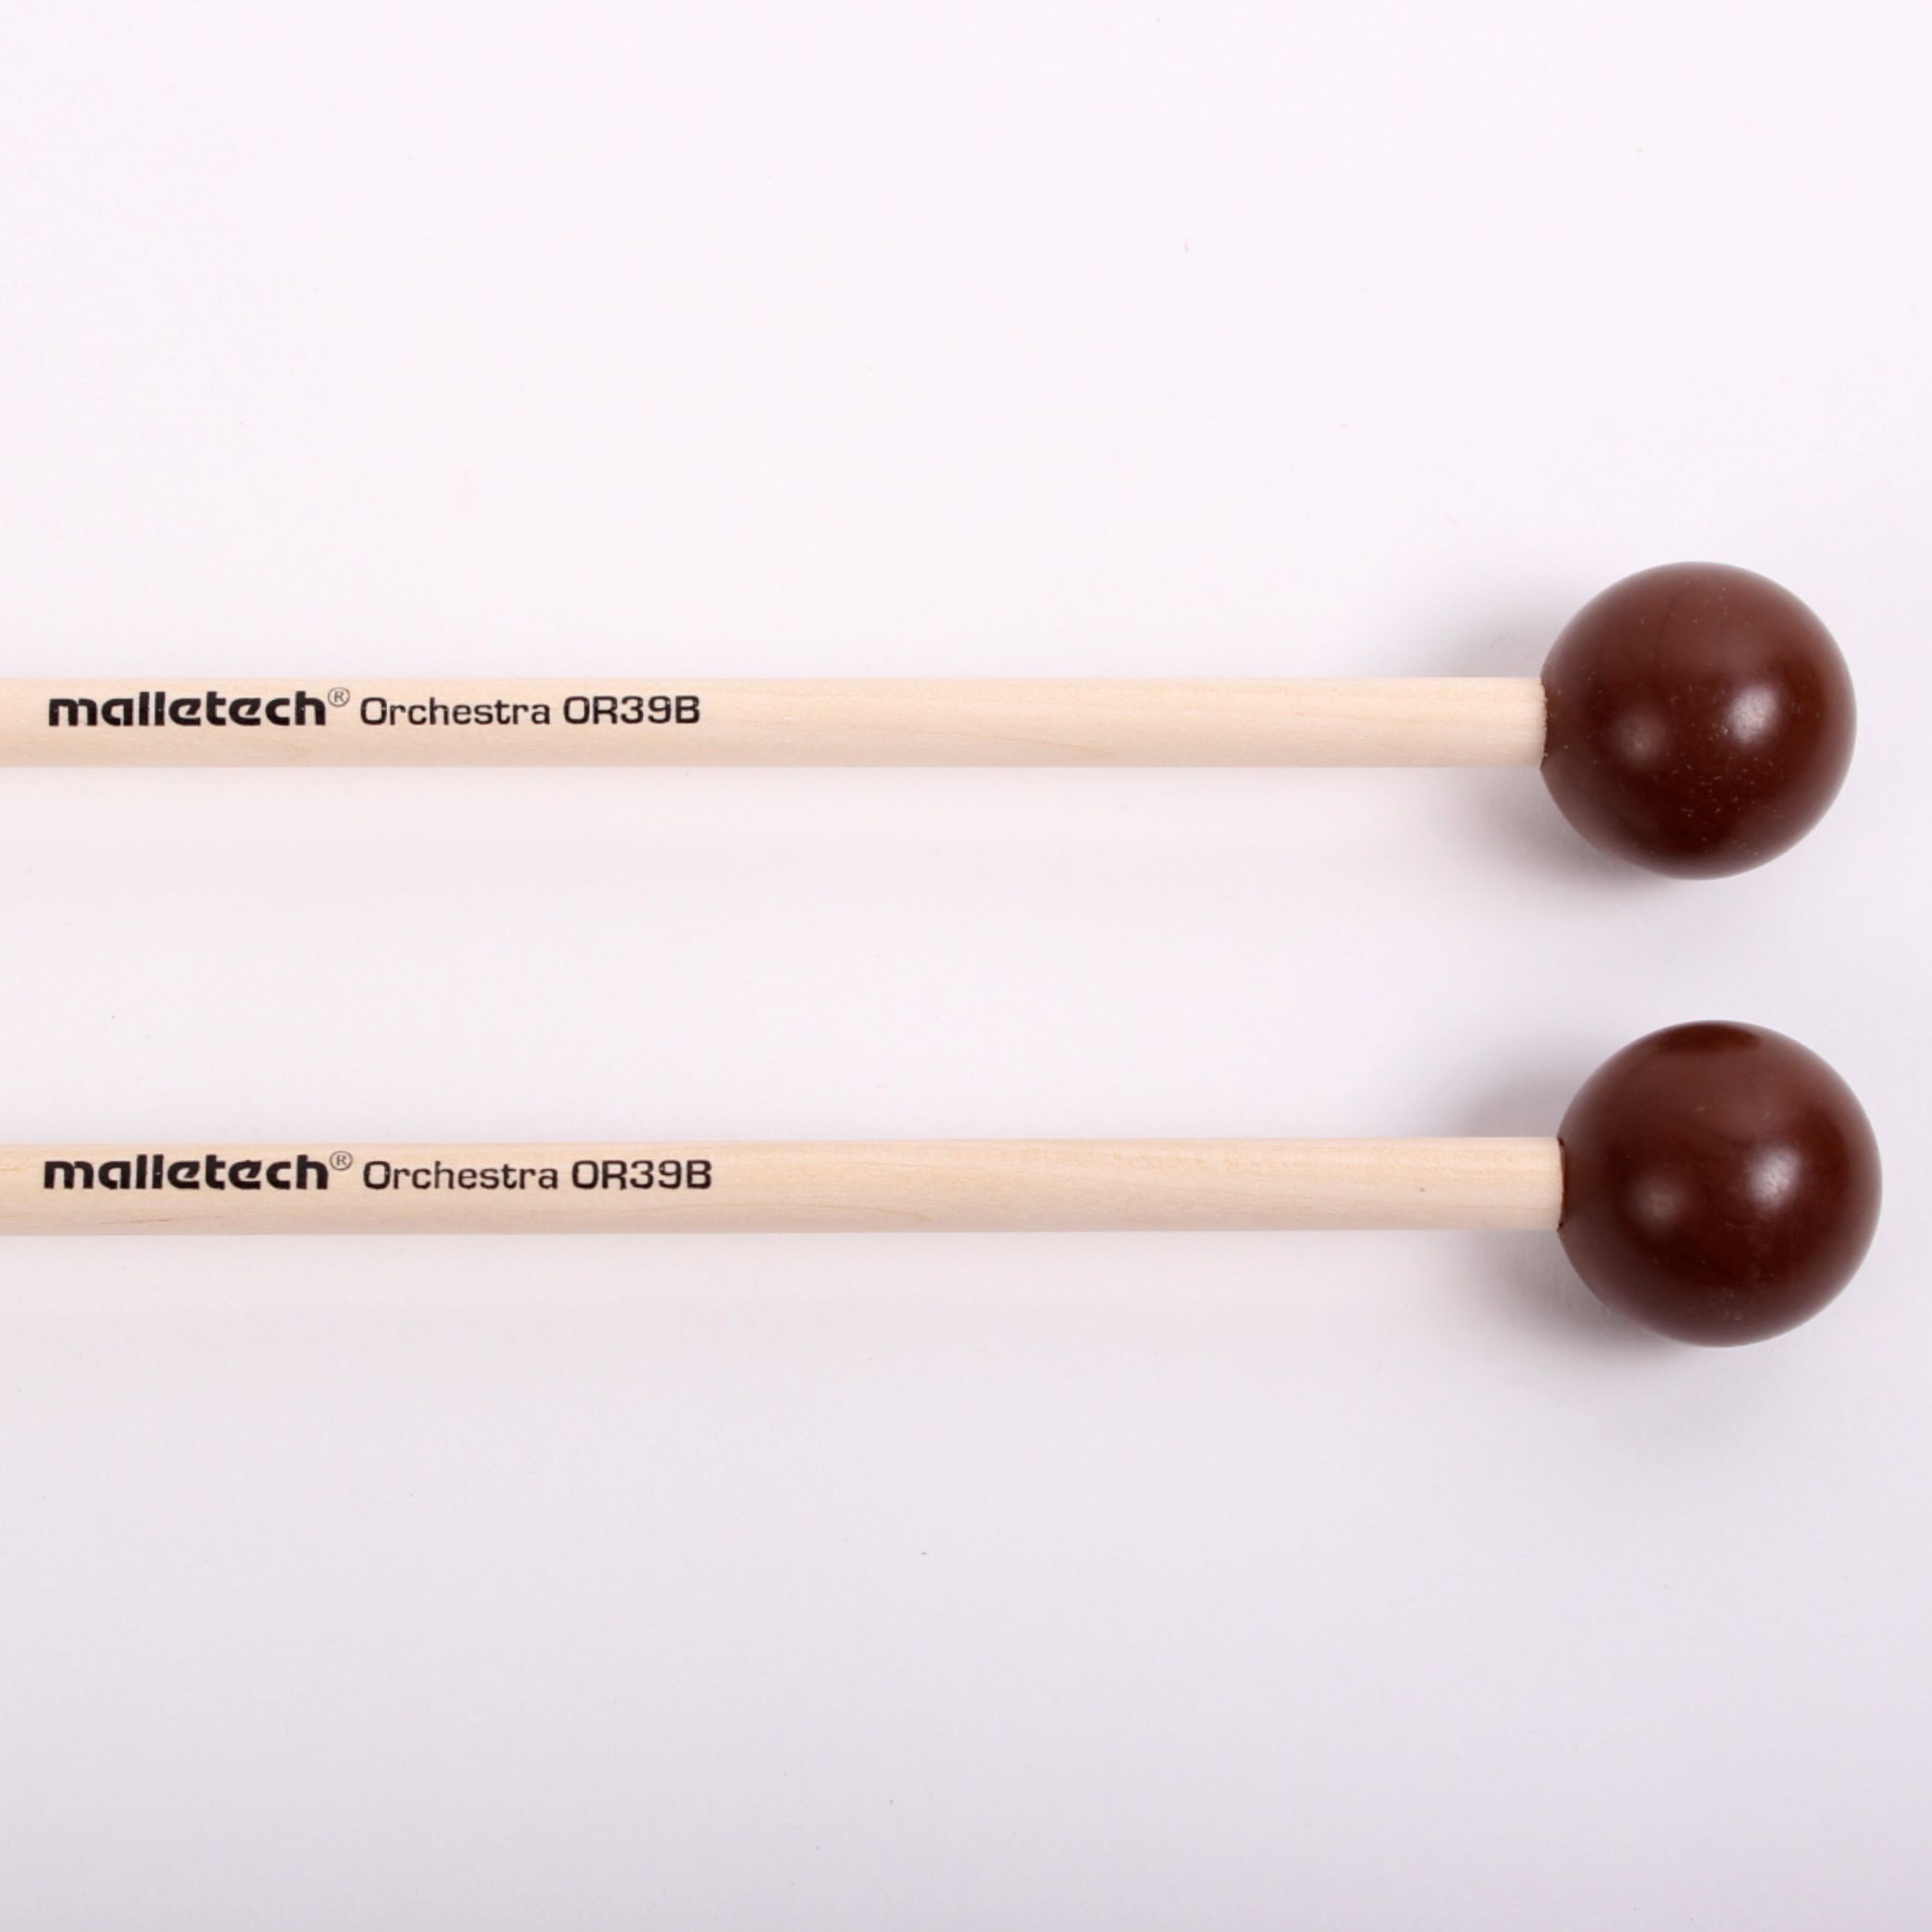 Malletech OR39 Orchestra Series Hard Light Weight Xylophone Mallets